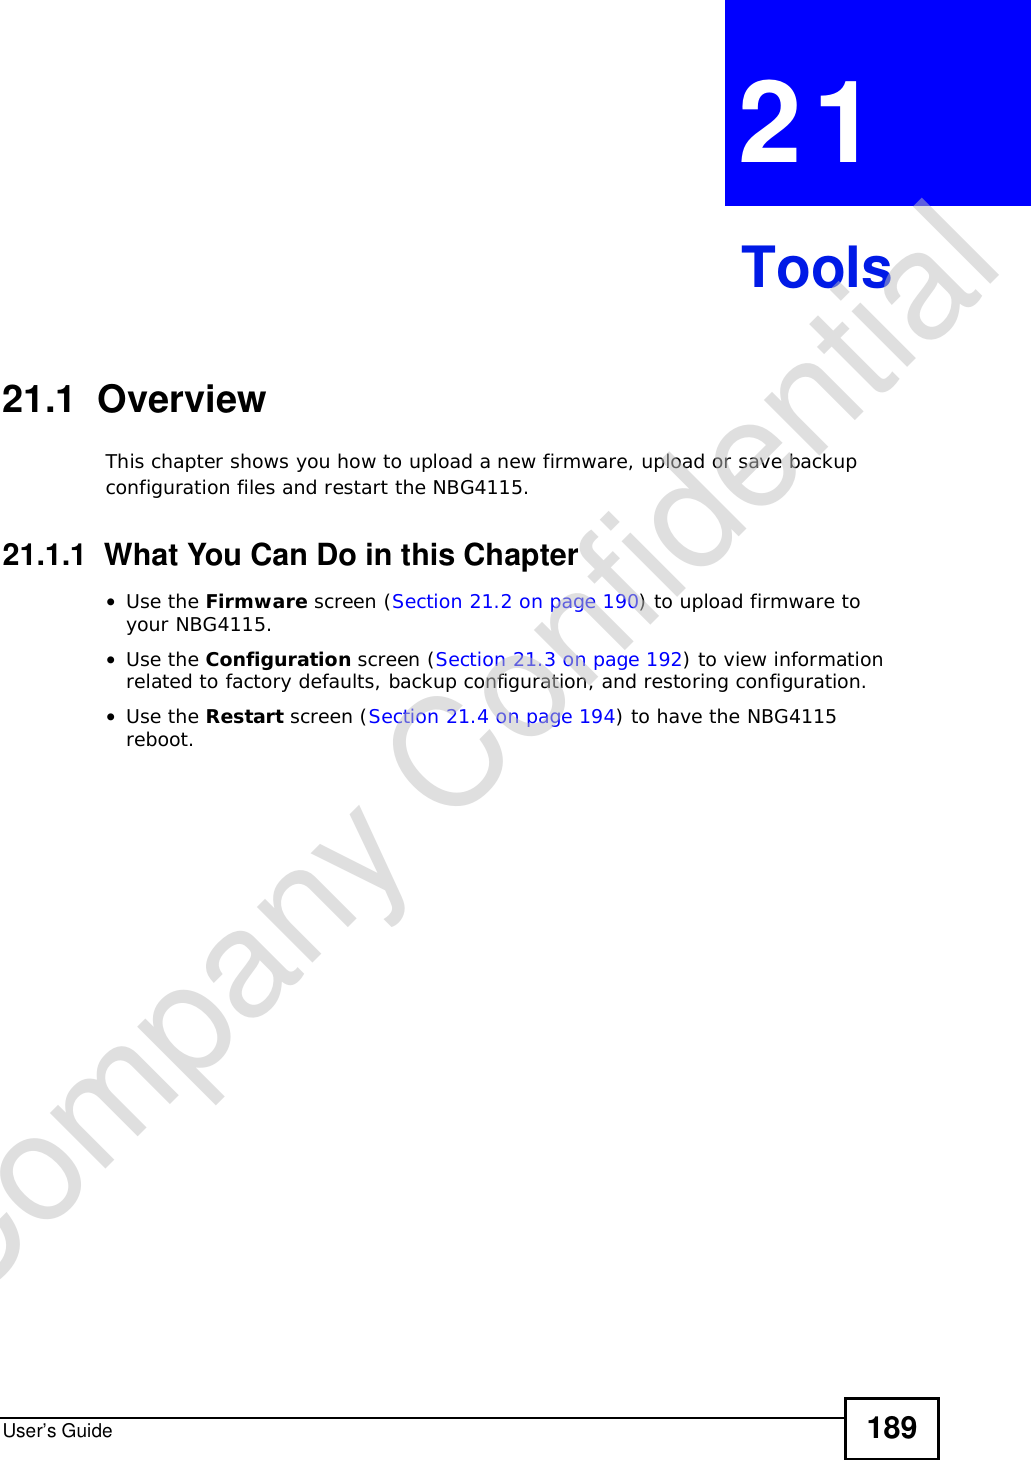 User’s Guide 189CHAPTER 21Tools21.1  OverviewThis chapter shows you how to upload a new firmware, upload or save backup configuration files and restart the NBG4115.21.1.1  What You Can Do in this Chapter•Use the Firmware screen (Section 21.2 on page 190) to upload firmware to your NBG4115.•Use the Configuration screen (Section 21.3 on page 192) to view information related to factory defaults, backup configuration, and restoring configuration.•Use the Restart screen (Section 21.4 on page 194) to have the NBG4115 reboot.Company Confidential